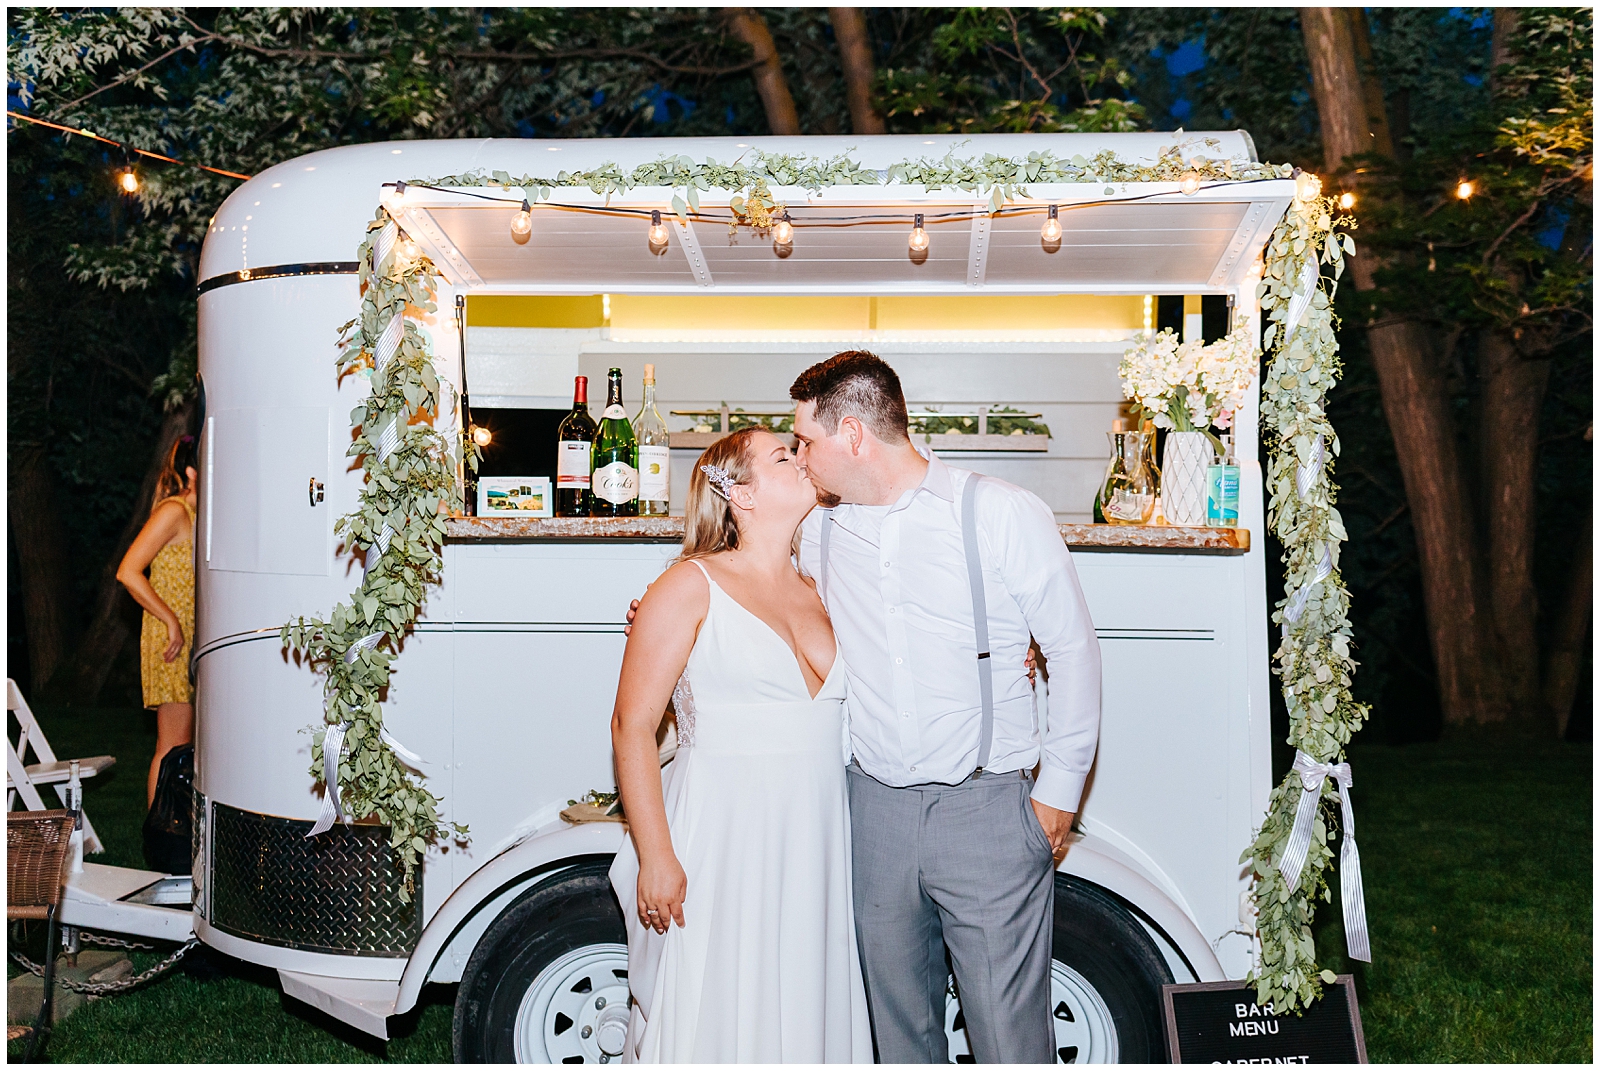 Bride and Groom Kiss in front of Whimsical Wagons horse trailer mobile bar